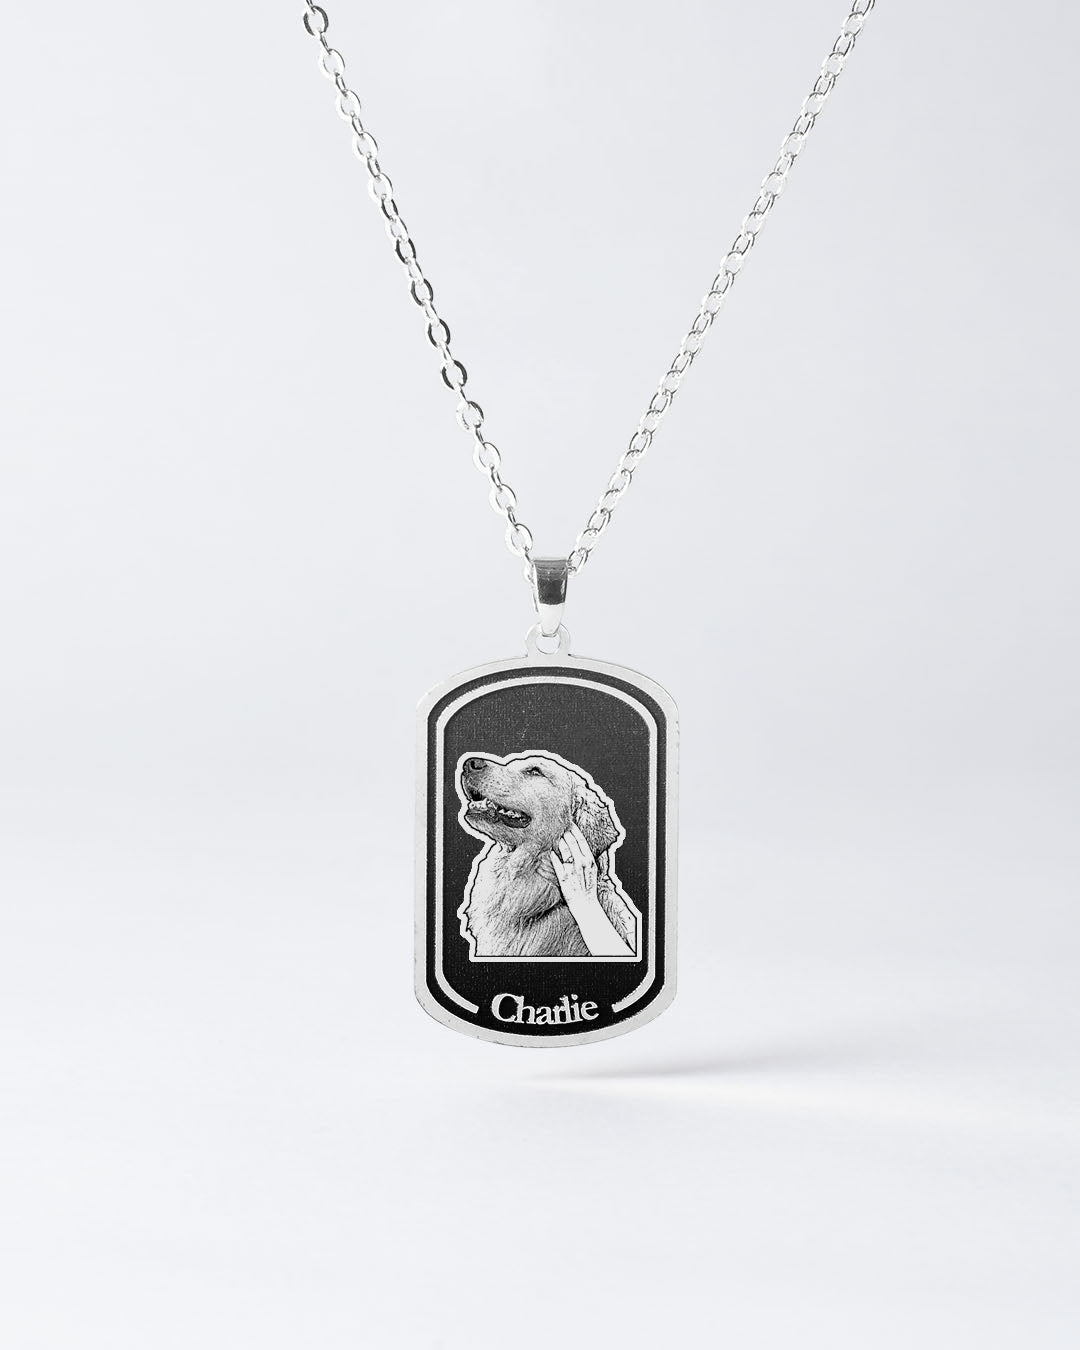 Custom Engraved Black Dogtag Necklace with Personalized Dog Photo - Sleek Memorial Jewelry for Pet Lovers